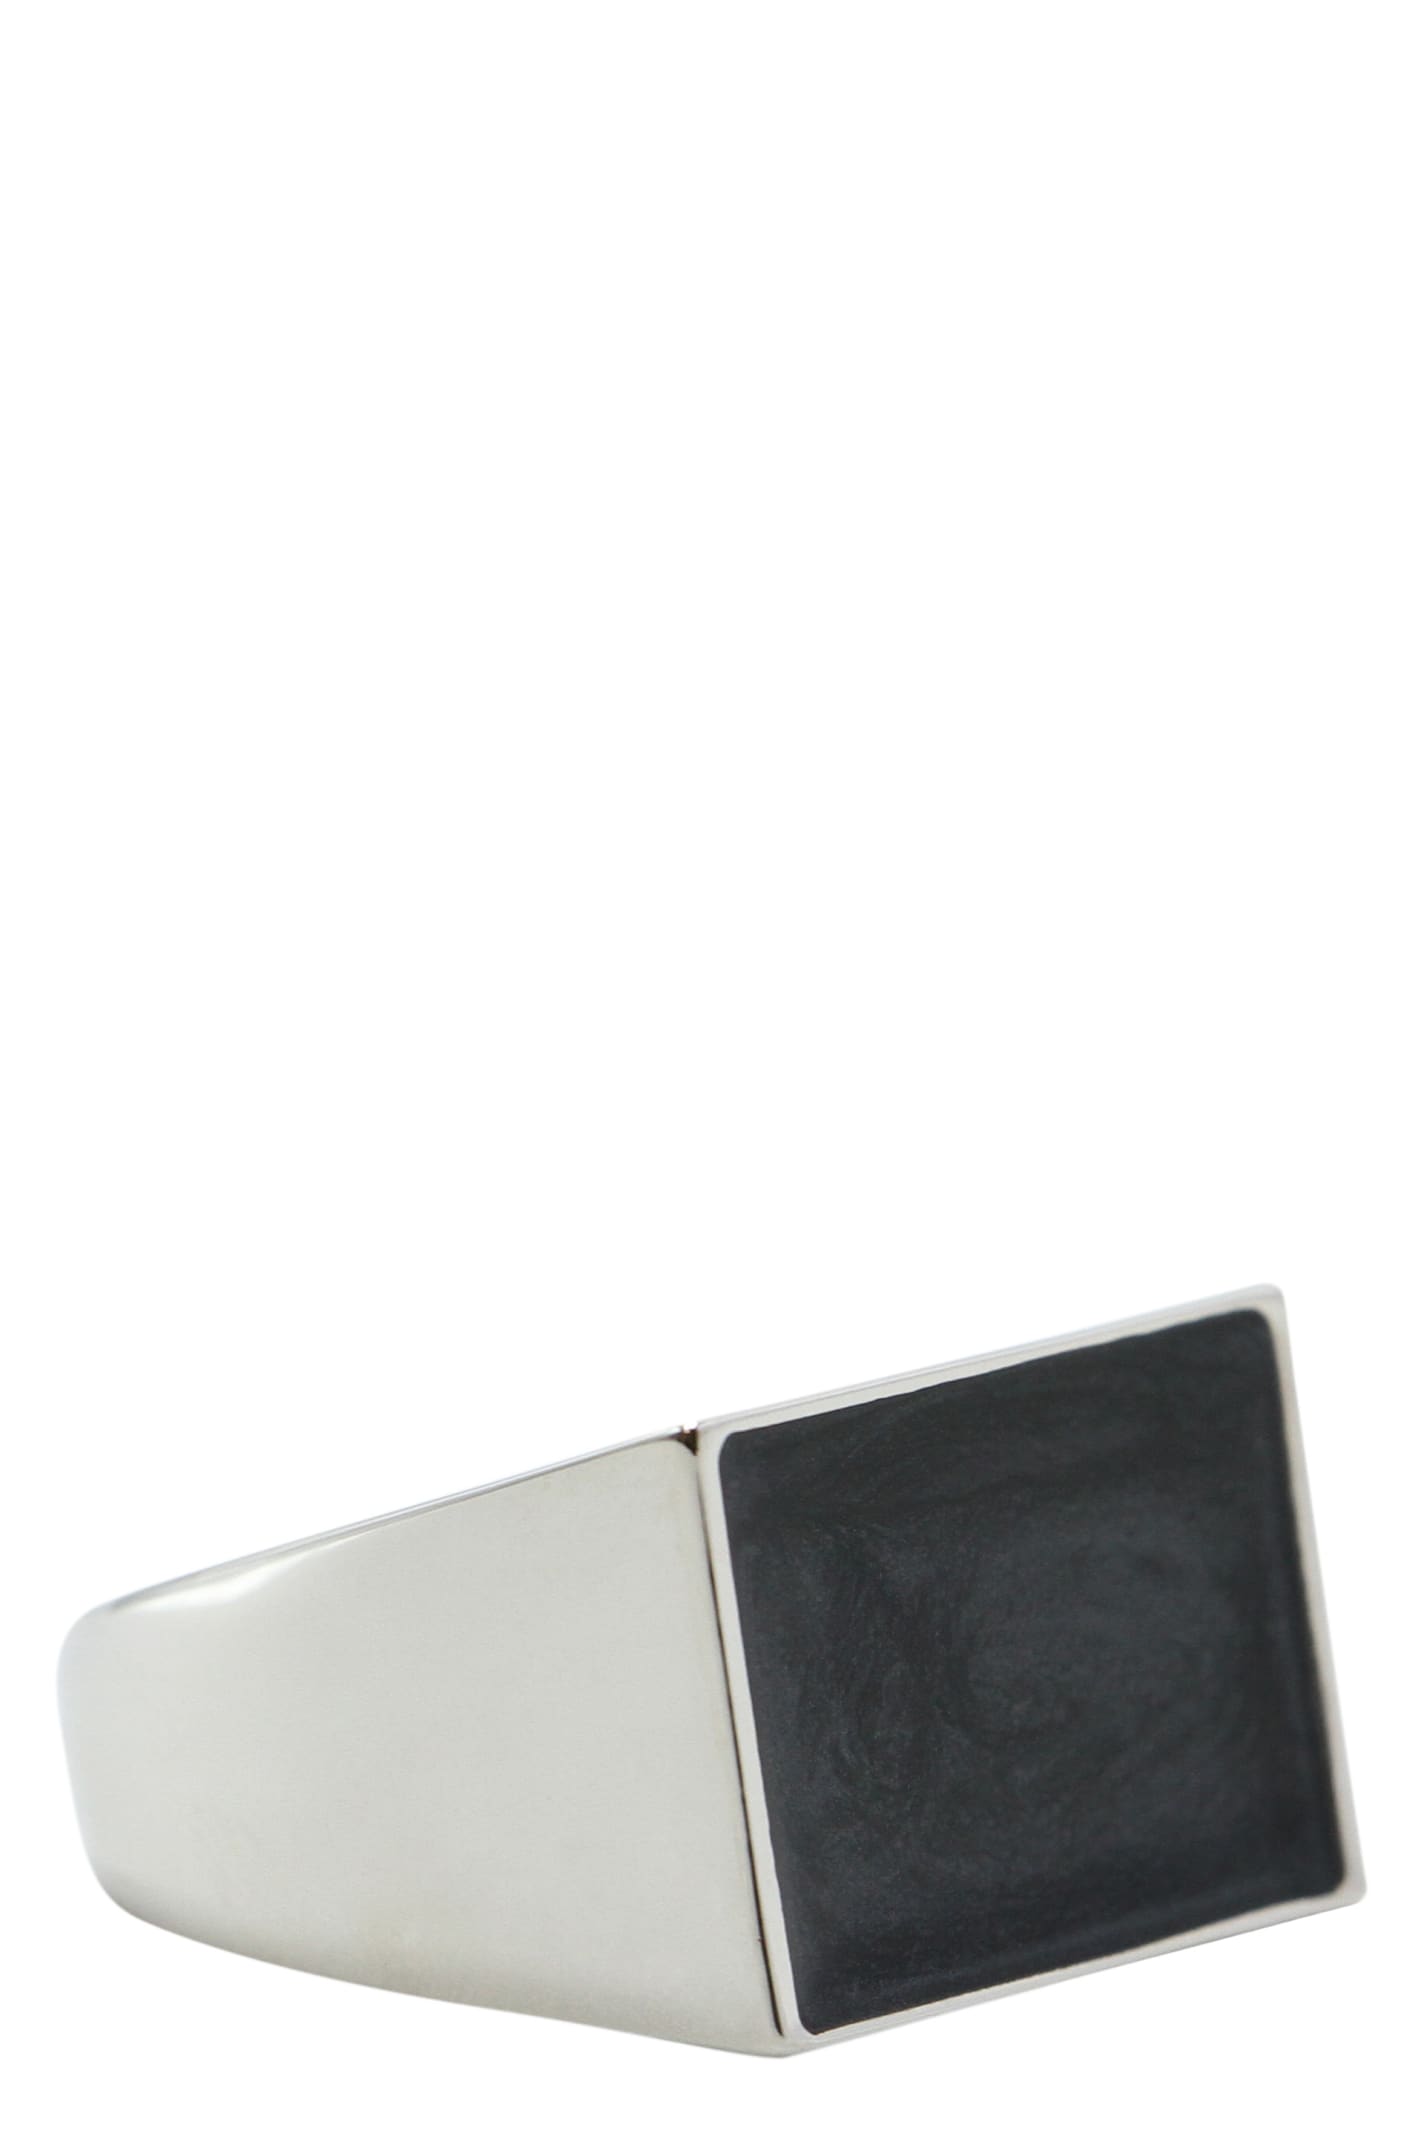 Dries Van Noten Square Ring In Silver